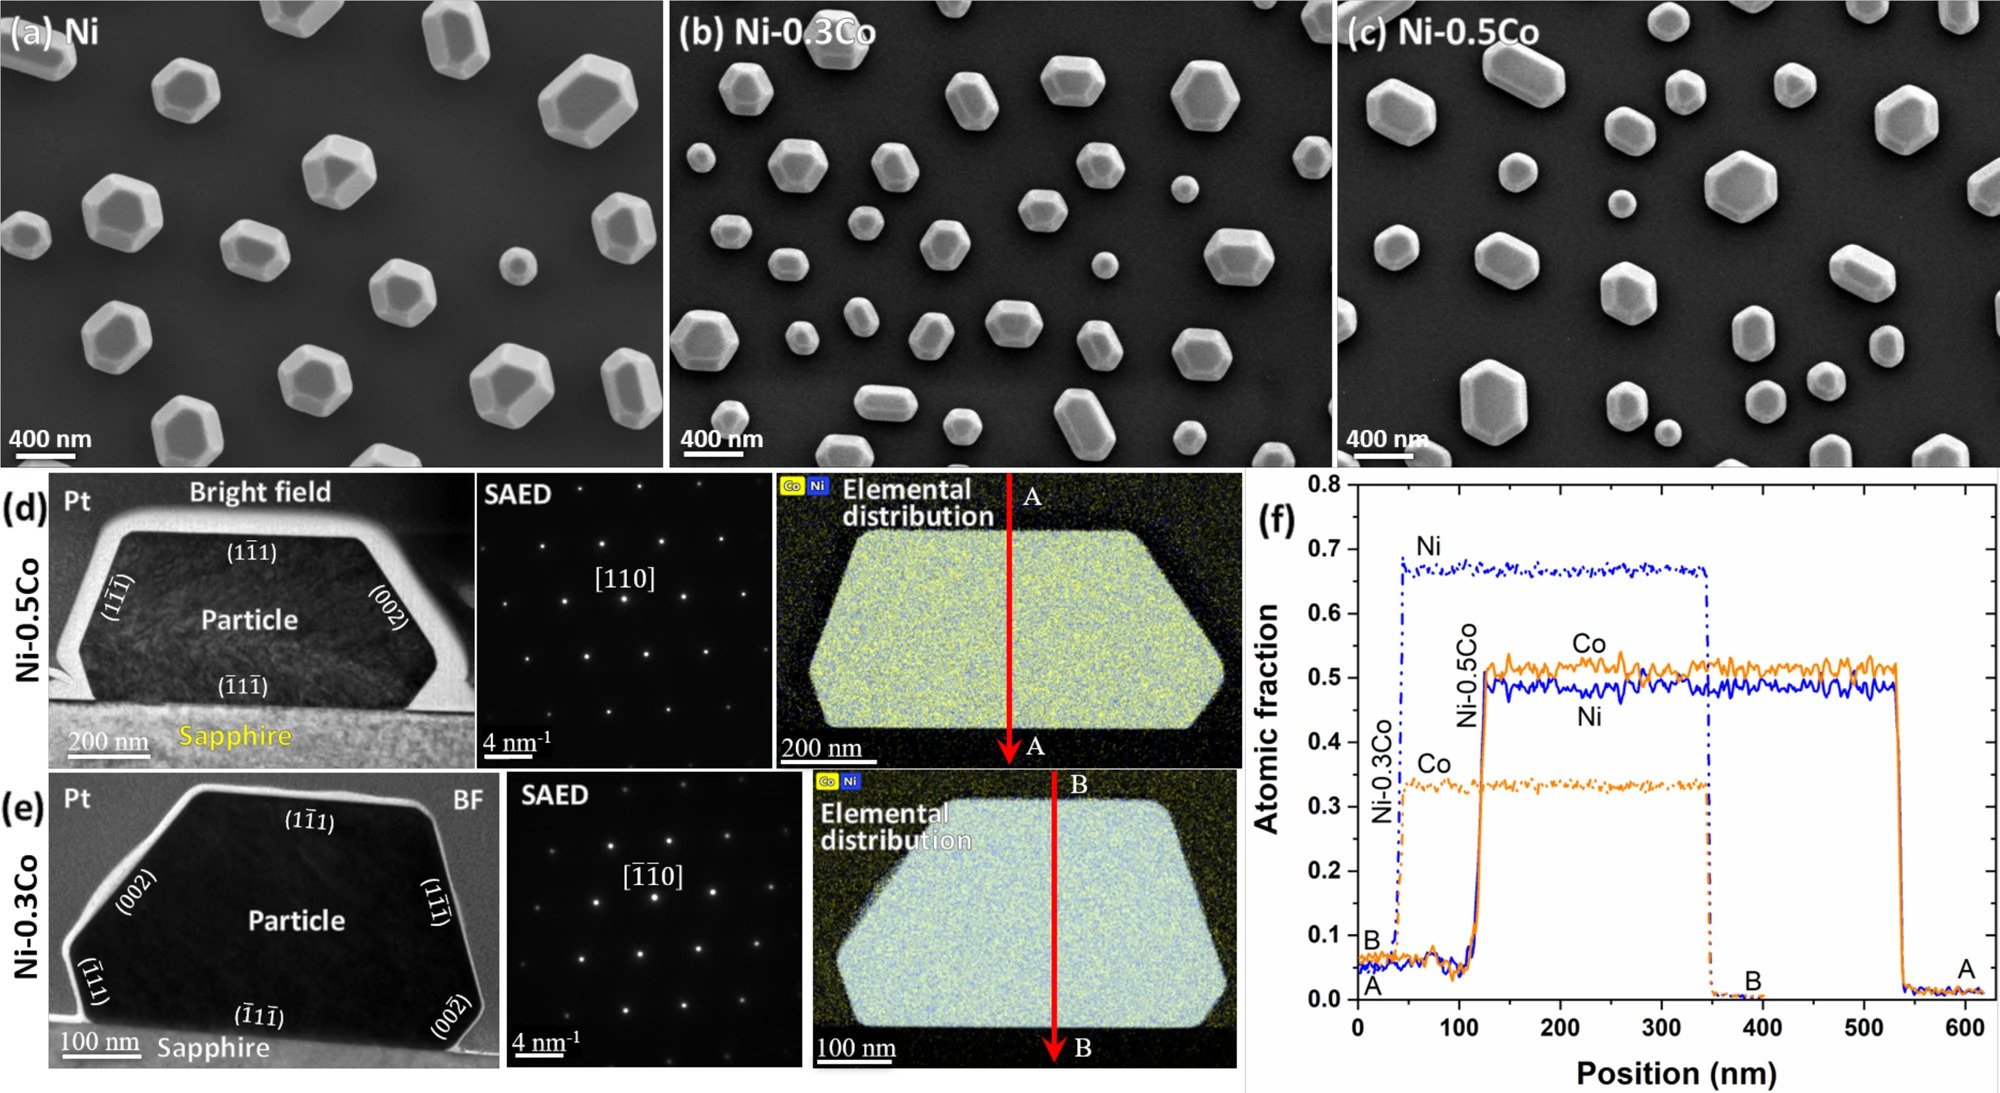 Characterization of Ni and Ni-Co nanoparticles produced by solid-state dewetting